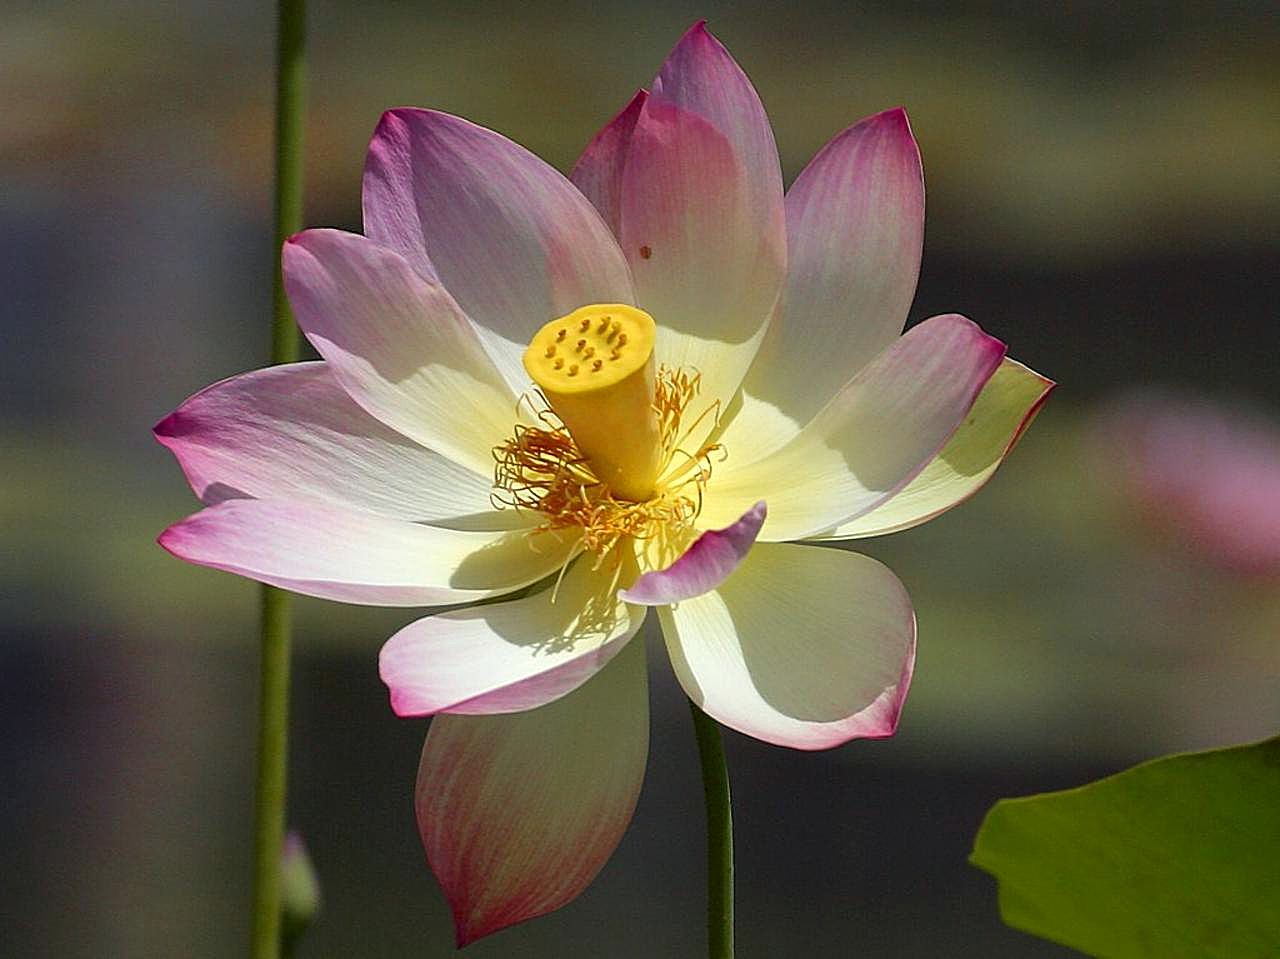 File:Lillies lilly lotus flowers.jpg - Wikimedia Commons